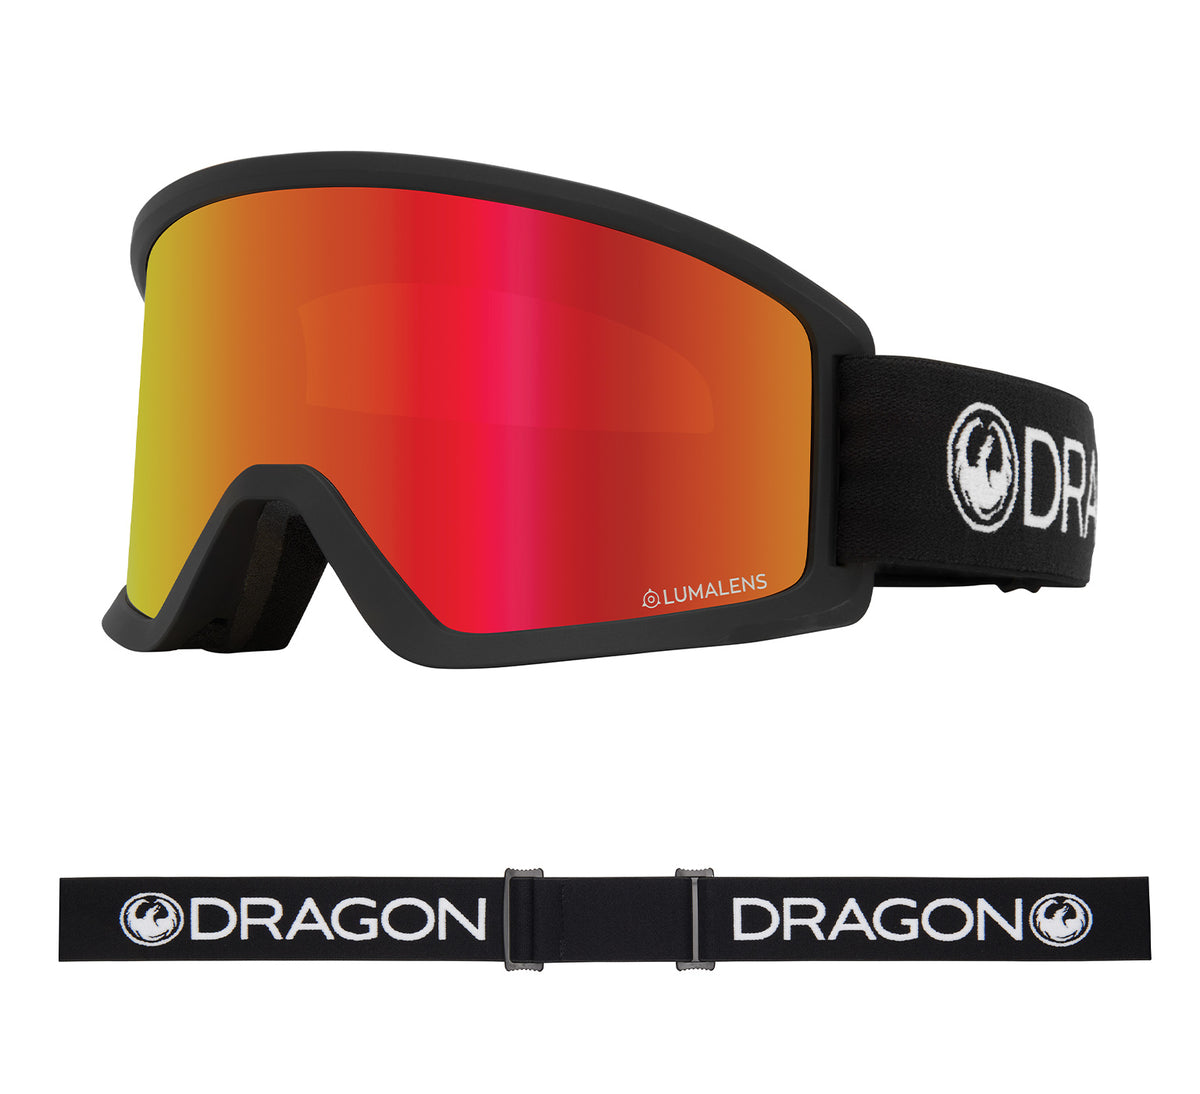 DX3 OTG - Black with Lumalens Red Ionized &amp; Lumalens Amber Lens